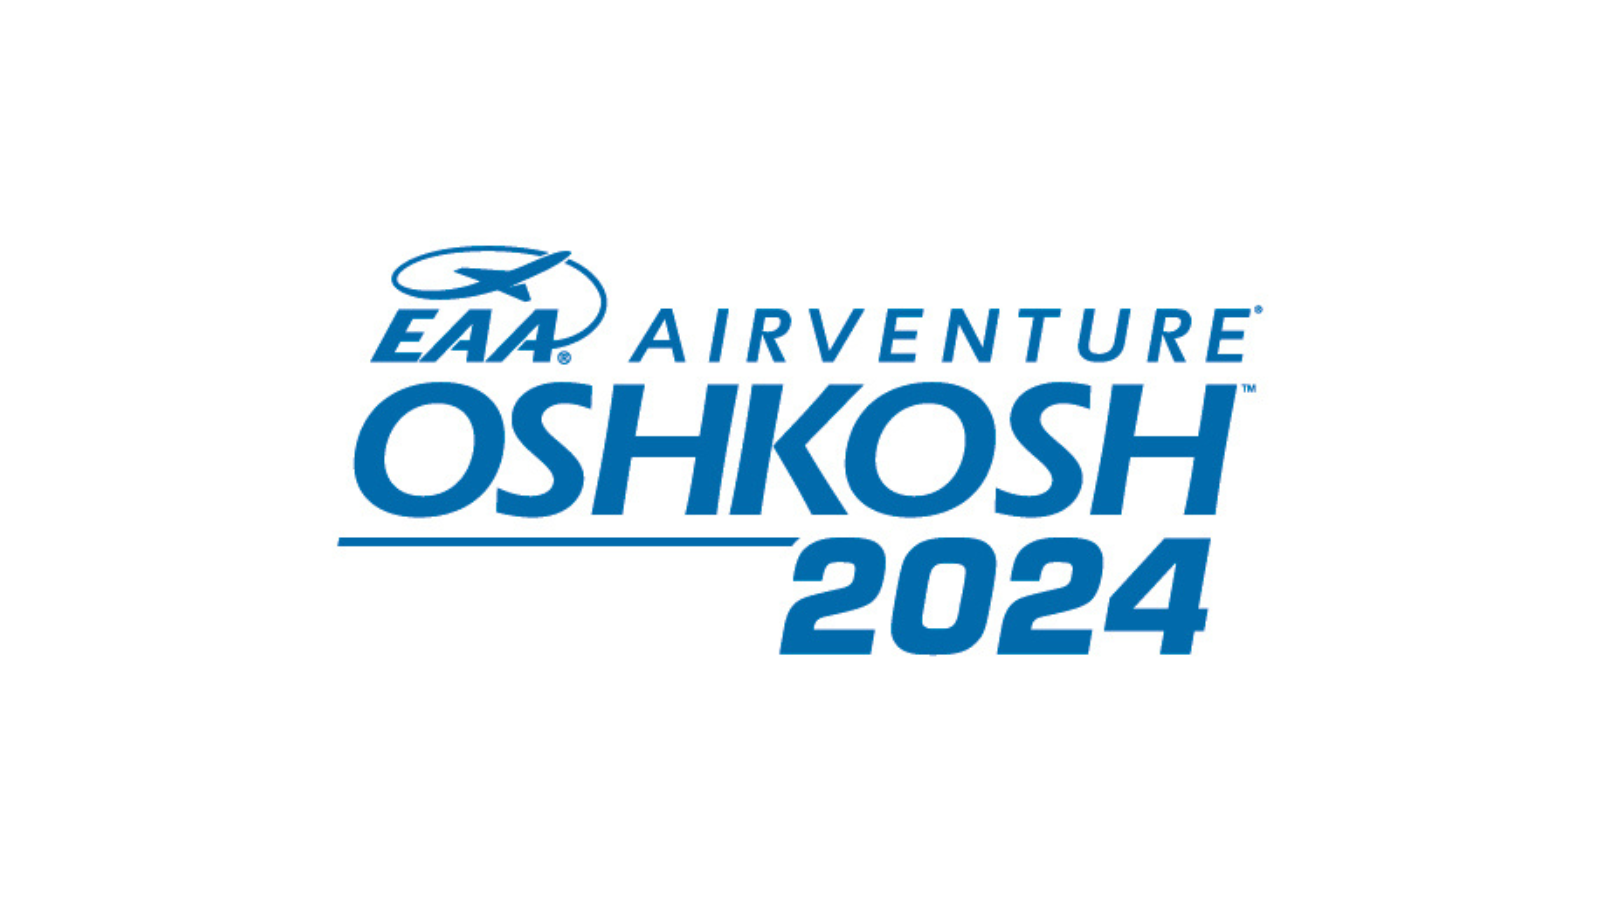 Over 750 jobs available for EAA AirVenture 2024